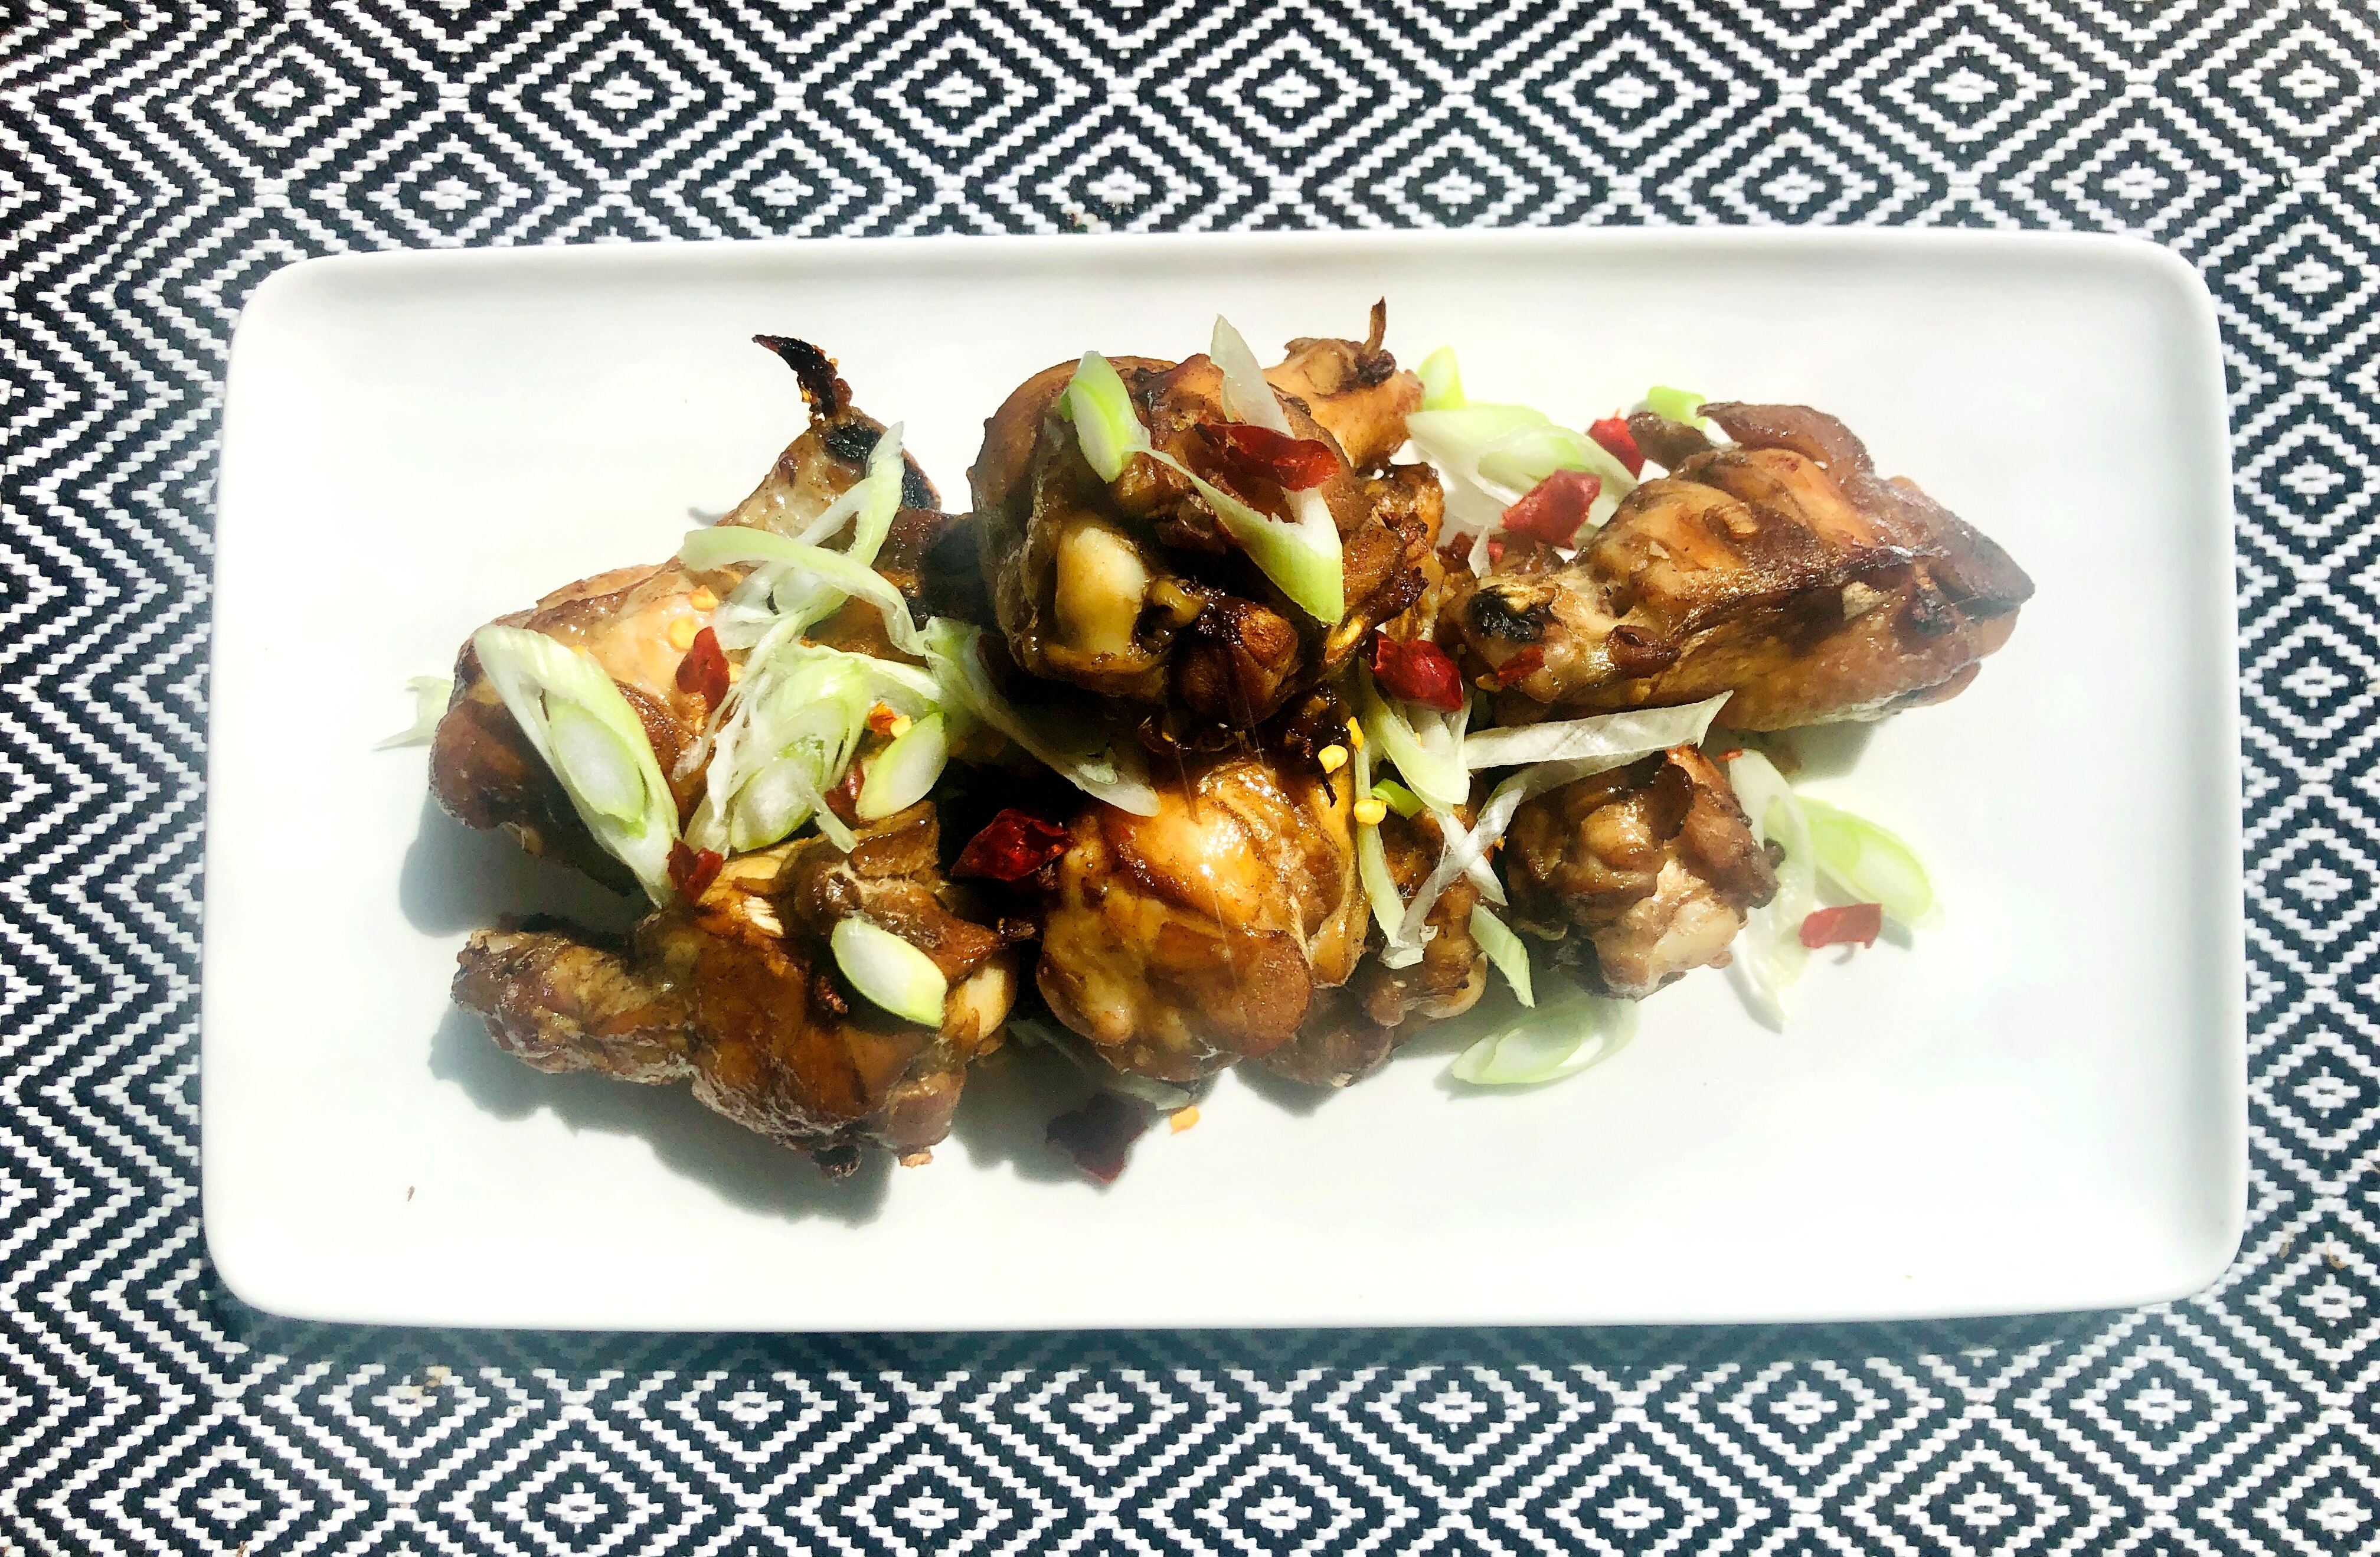 Chinese Cookbook: Sticky Chicken Wings, and Spinach and Peanut Salad